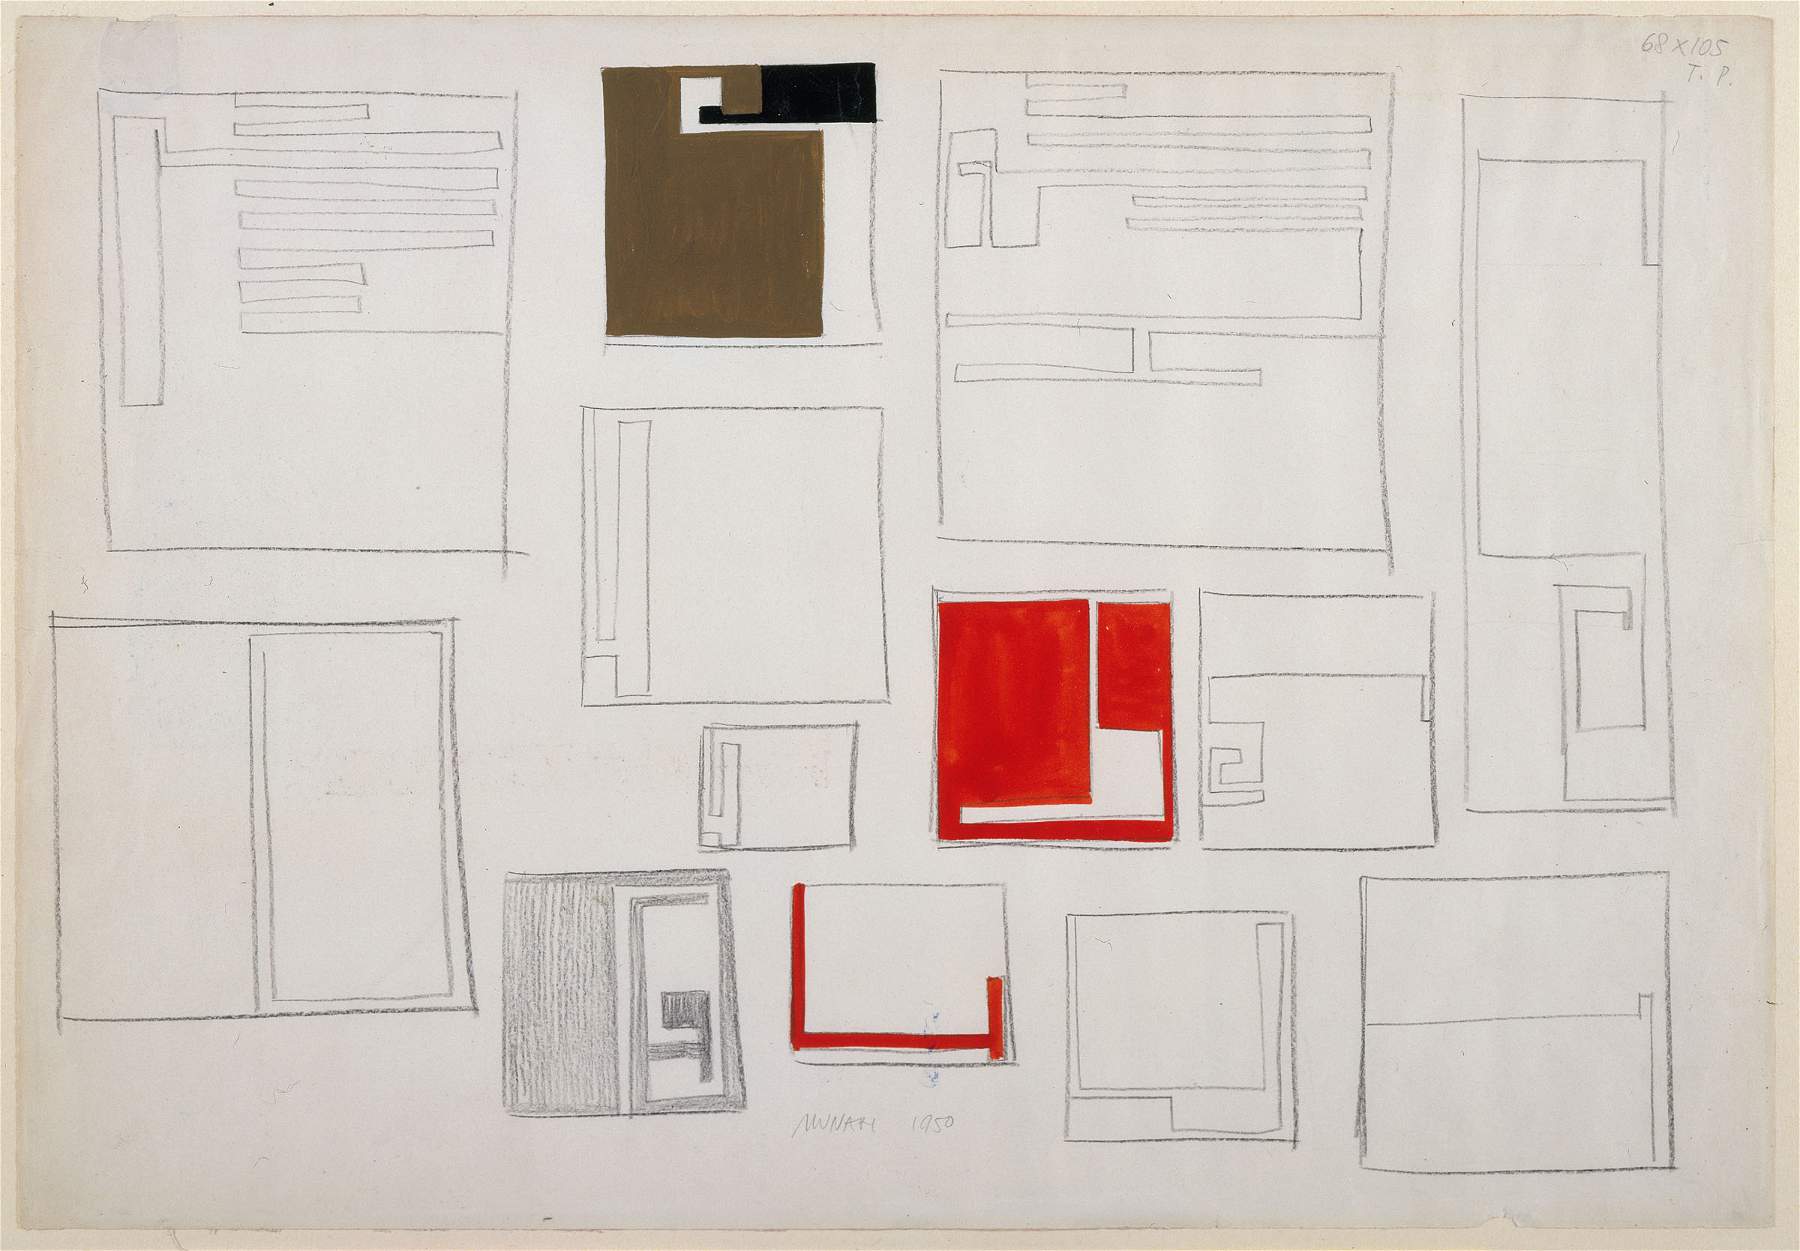 Geometric abstraction in Italy between 1930 and 1965: an exhibition at MA*GA Gallarate